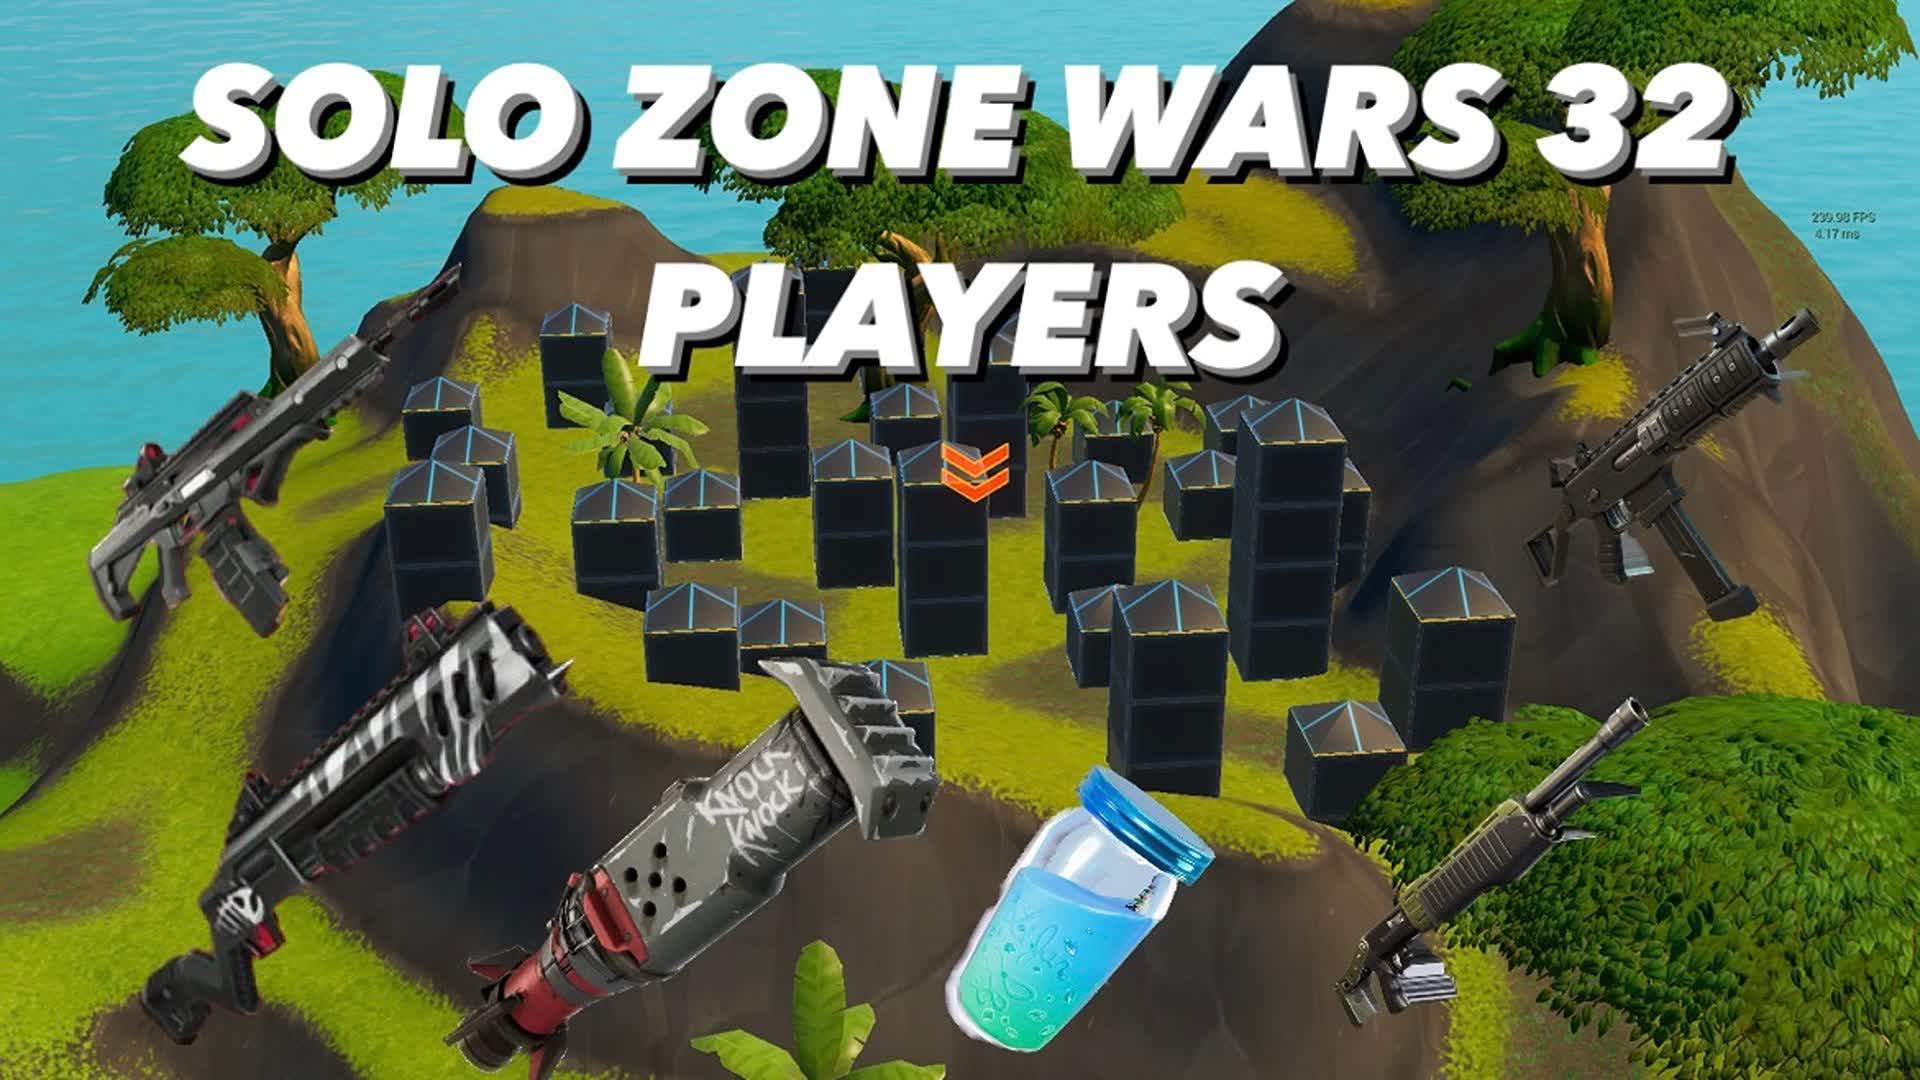 SOLO ZONE WARS 32 PLAYERS